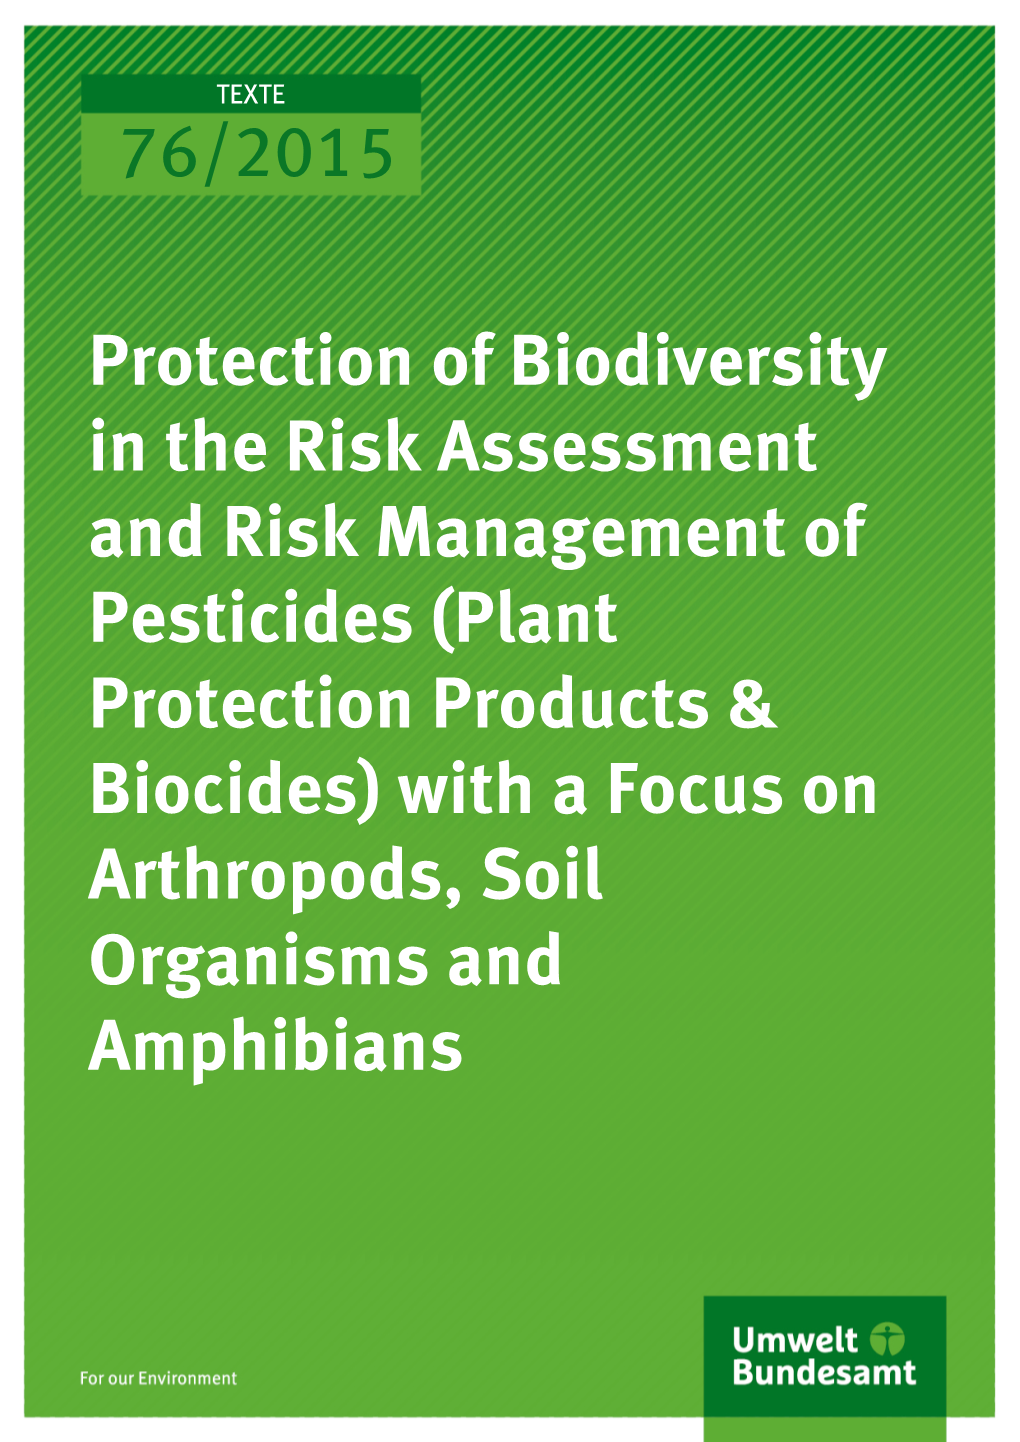 Protection of Biodiversity in the Risk Management